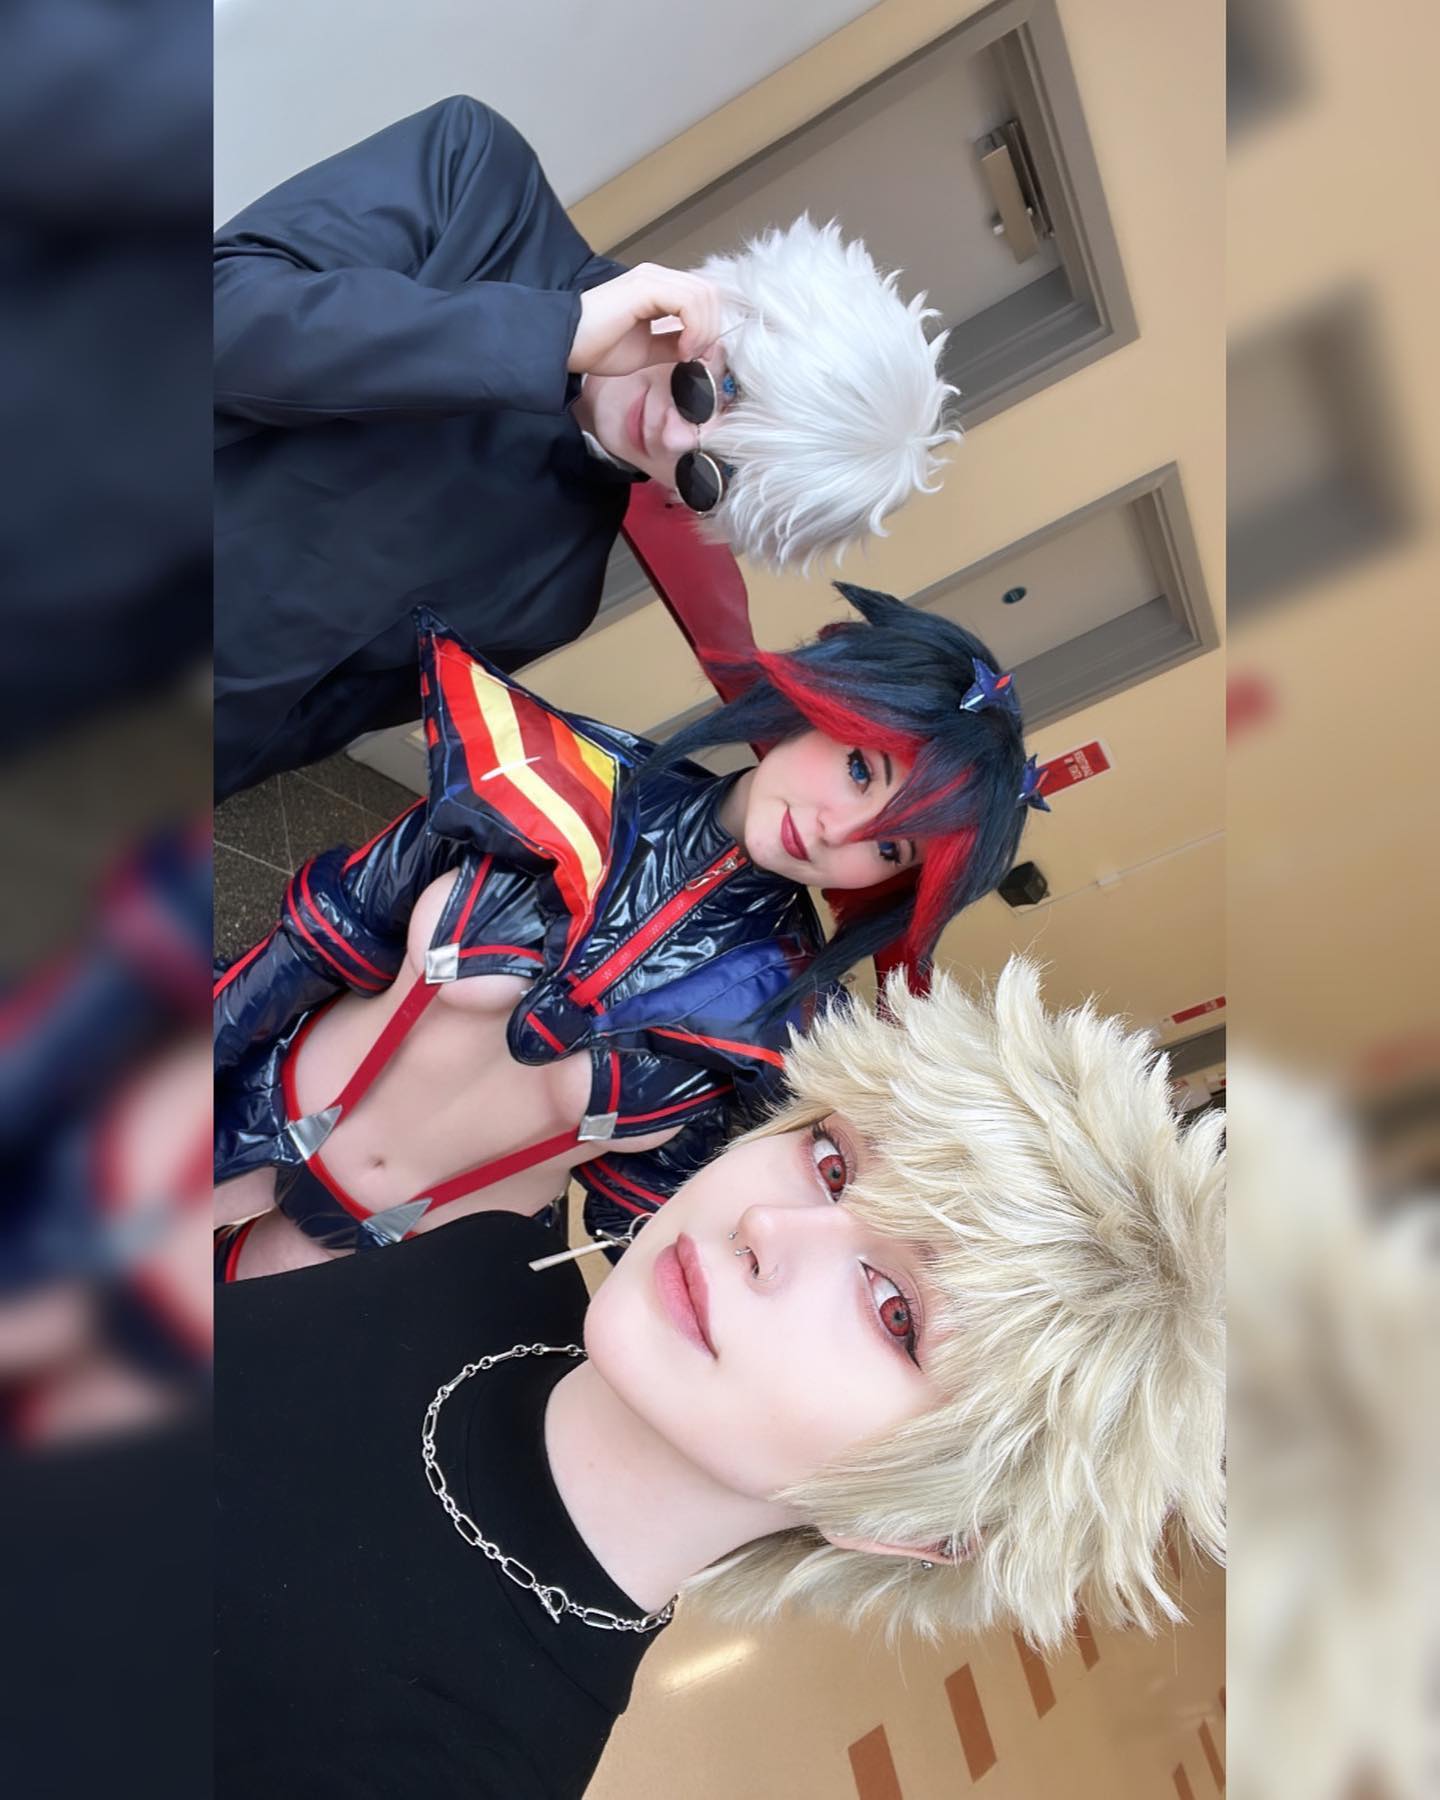 thank you everyone for another amazing con 🫶🏻🫶🏻🫶🏻
~
keep forgetting to take photoss 😝 tysm everyone who said hi to me! i really appreciate it 😌 so glad i got to make some new friends and speak with people i usually dont get a chance to see :) @megaconlive 
~
~
~
#bakugou #bakugoukatsuki #rengoku #gojosatoru #cosplay #megacon #ukcosplay #demonslayer #bokunoheroacademia #myheroacademia #bokunoheroacademiacosplay #bakugoucosplay #gojocosplay